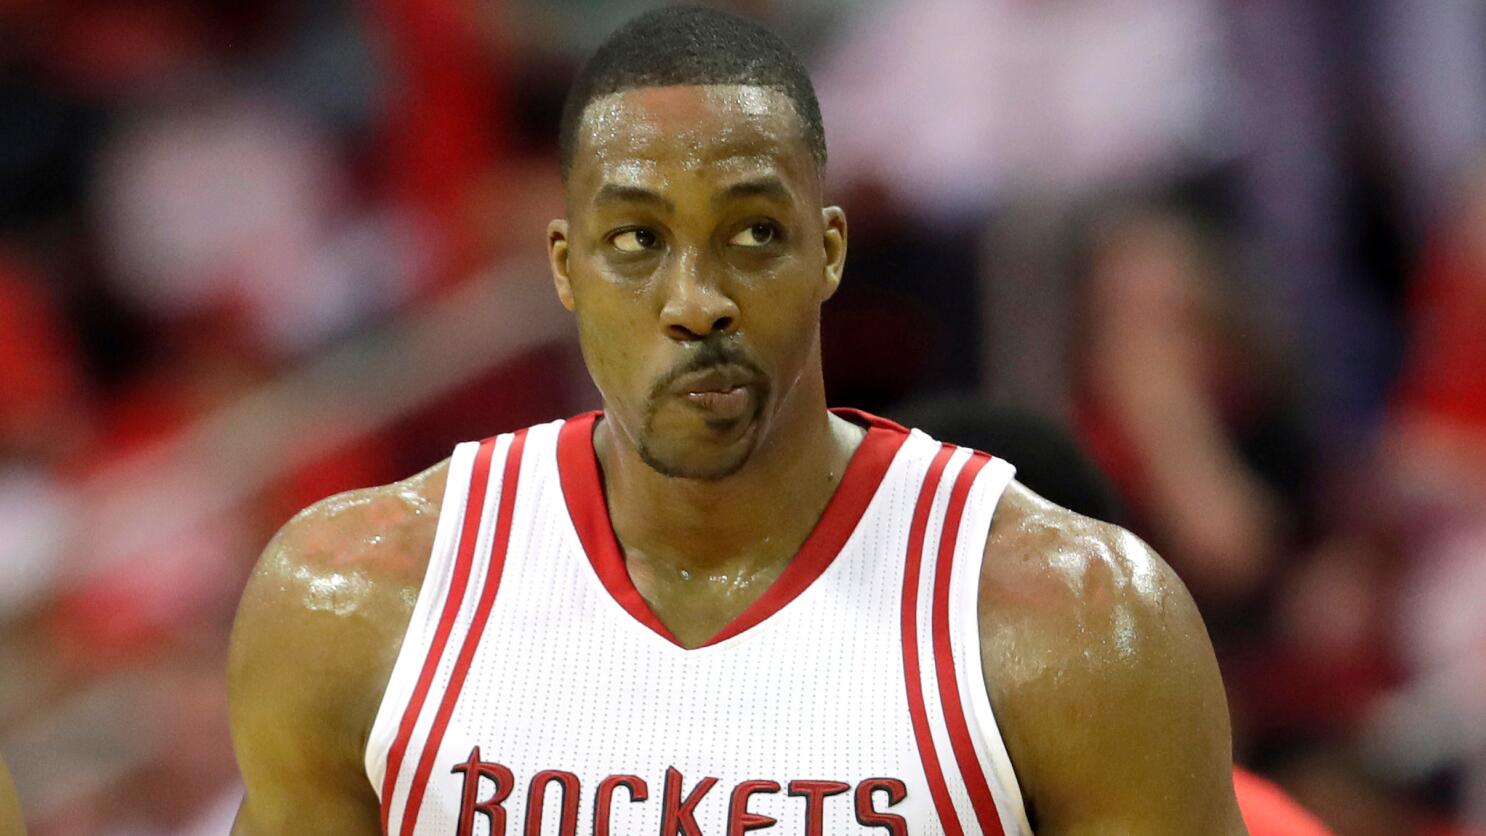 Reports: Hawks' Dwight Howard hospitalized after flight from China